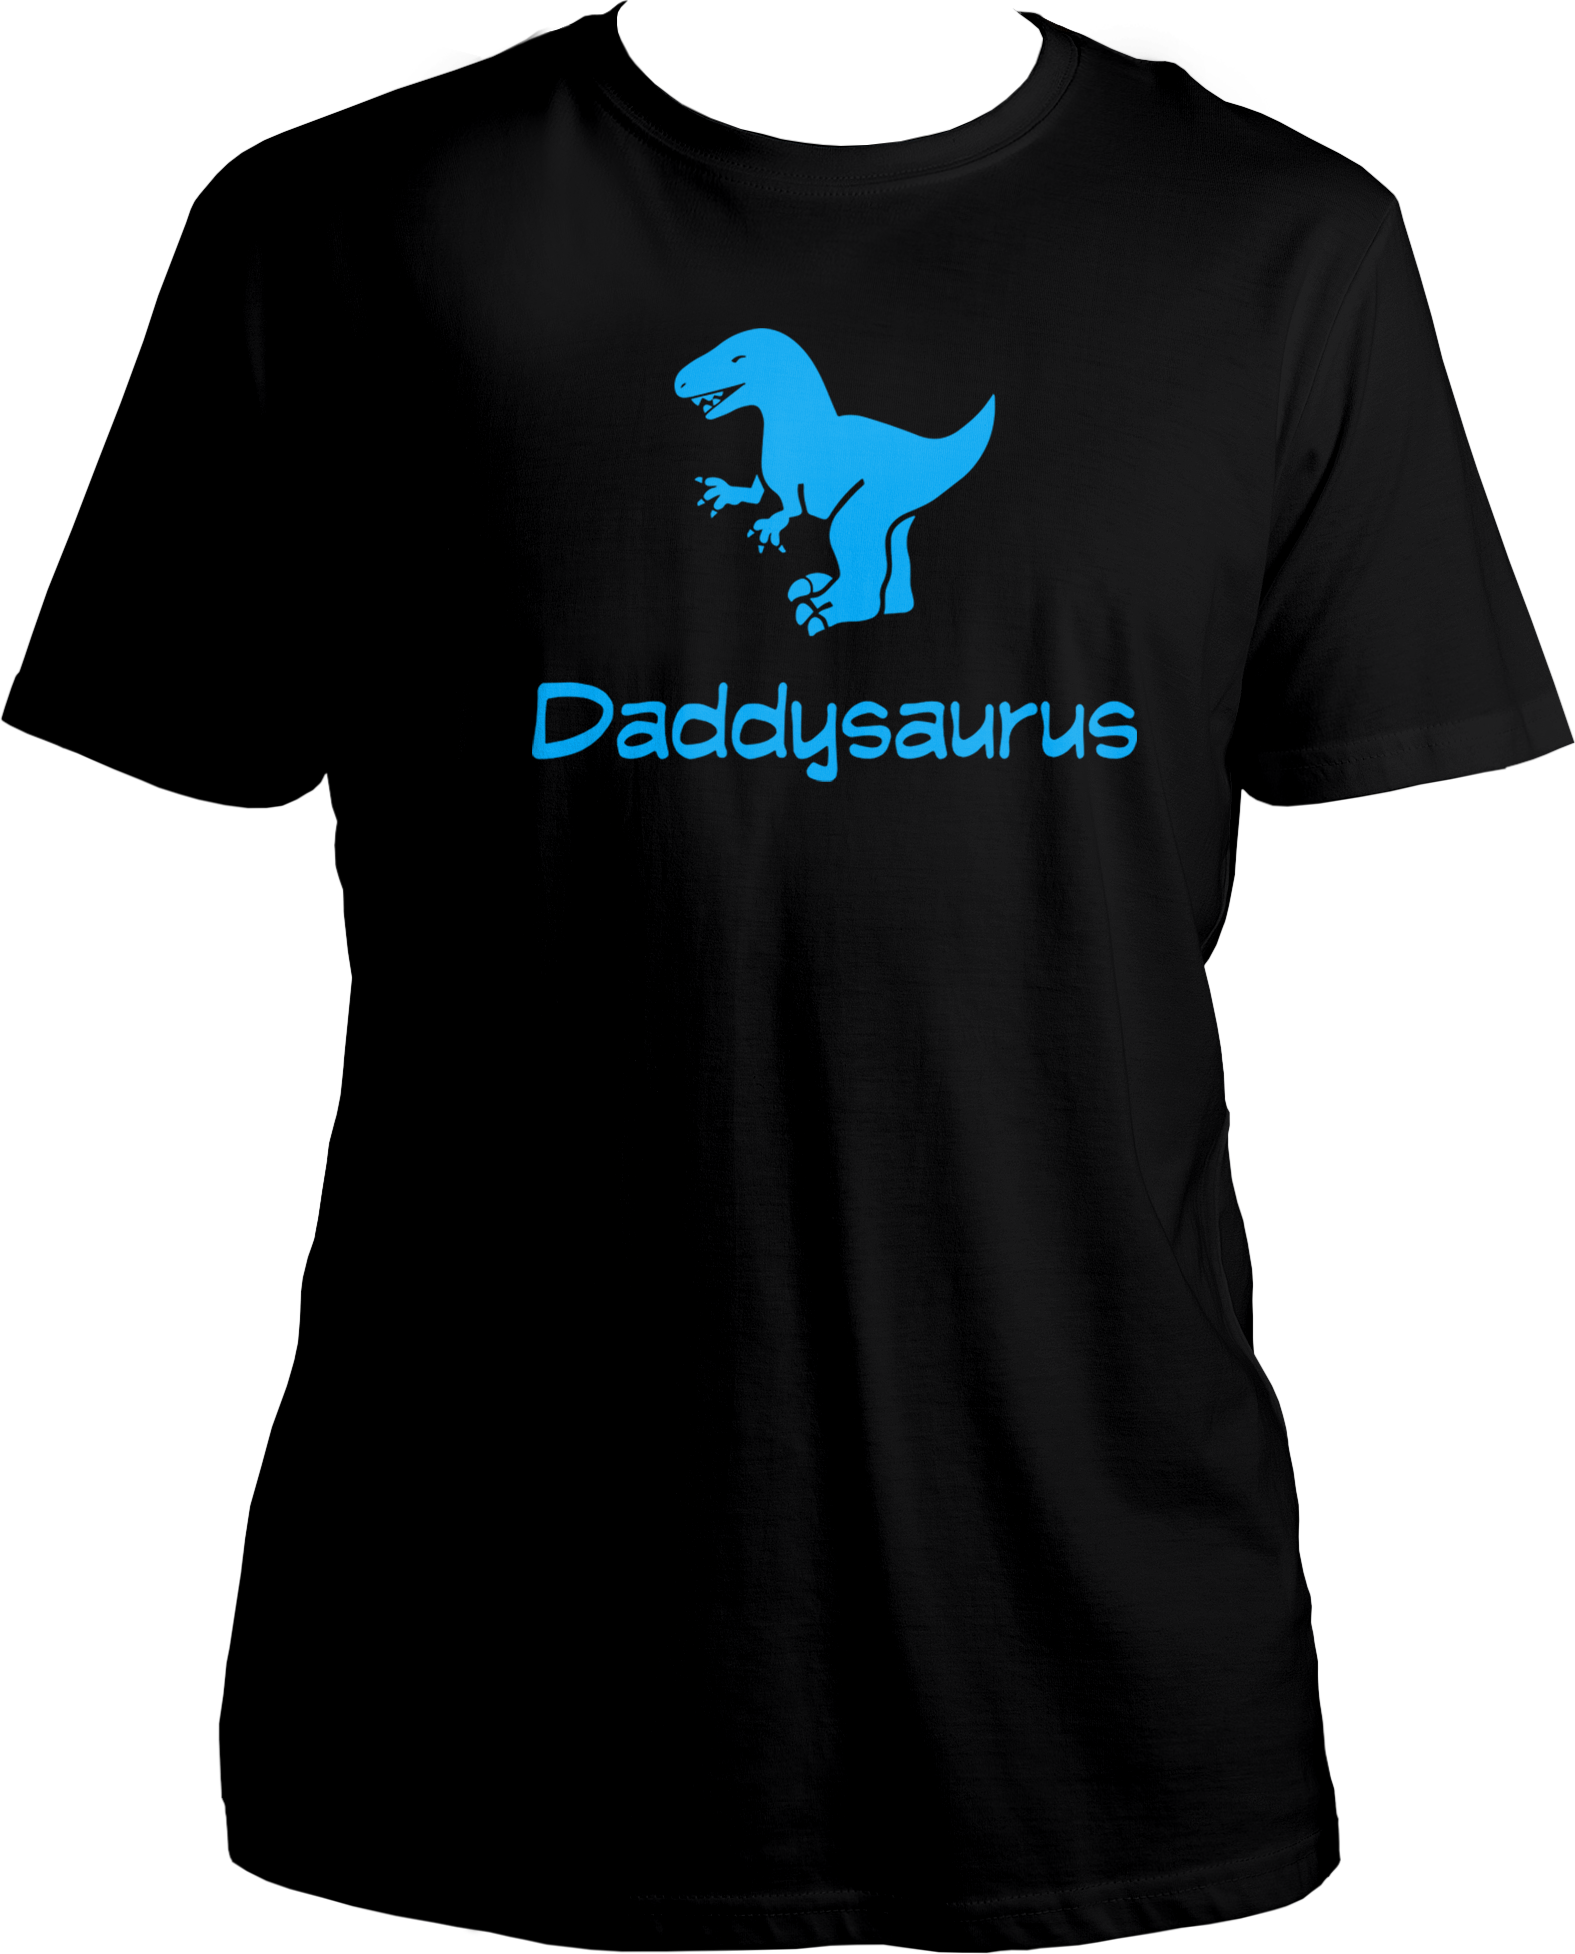 Introducing our exclusive Daddysaurus Unisex T-Shirts, perfect for the modern dad! Our collection features unique designs tailored for fatherhood celebrations, making birthdays and Father's Day truly special. Crafted with comfort and style in mind, these shirts are a must-have for every doting dad. Shop now at Garrari.com and let your dad roar with pride in his Daddysaurus attire!